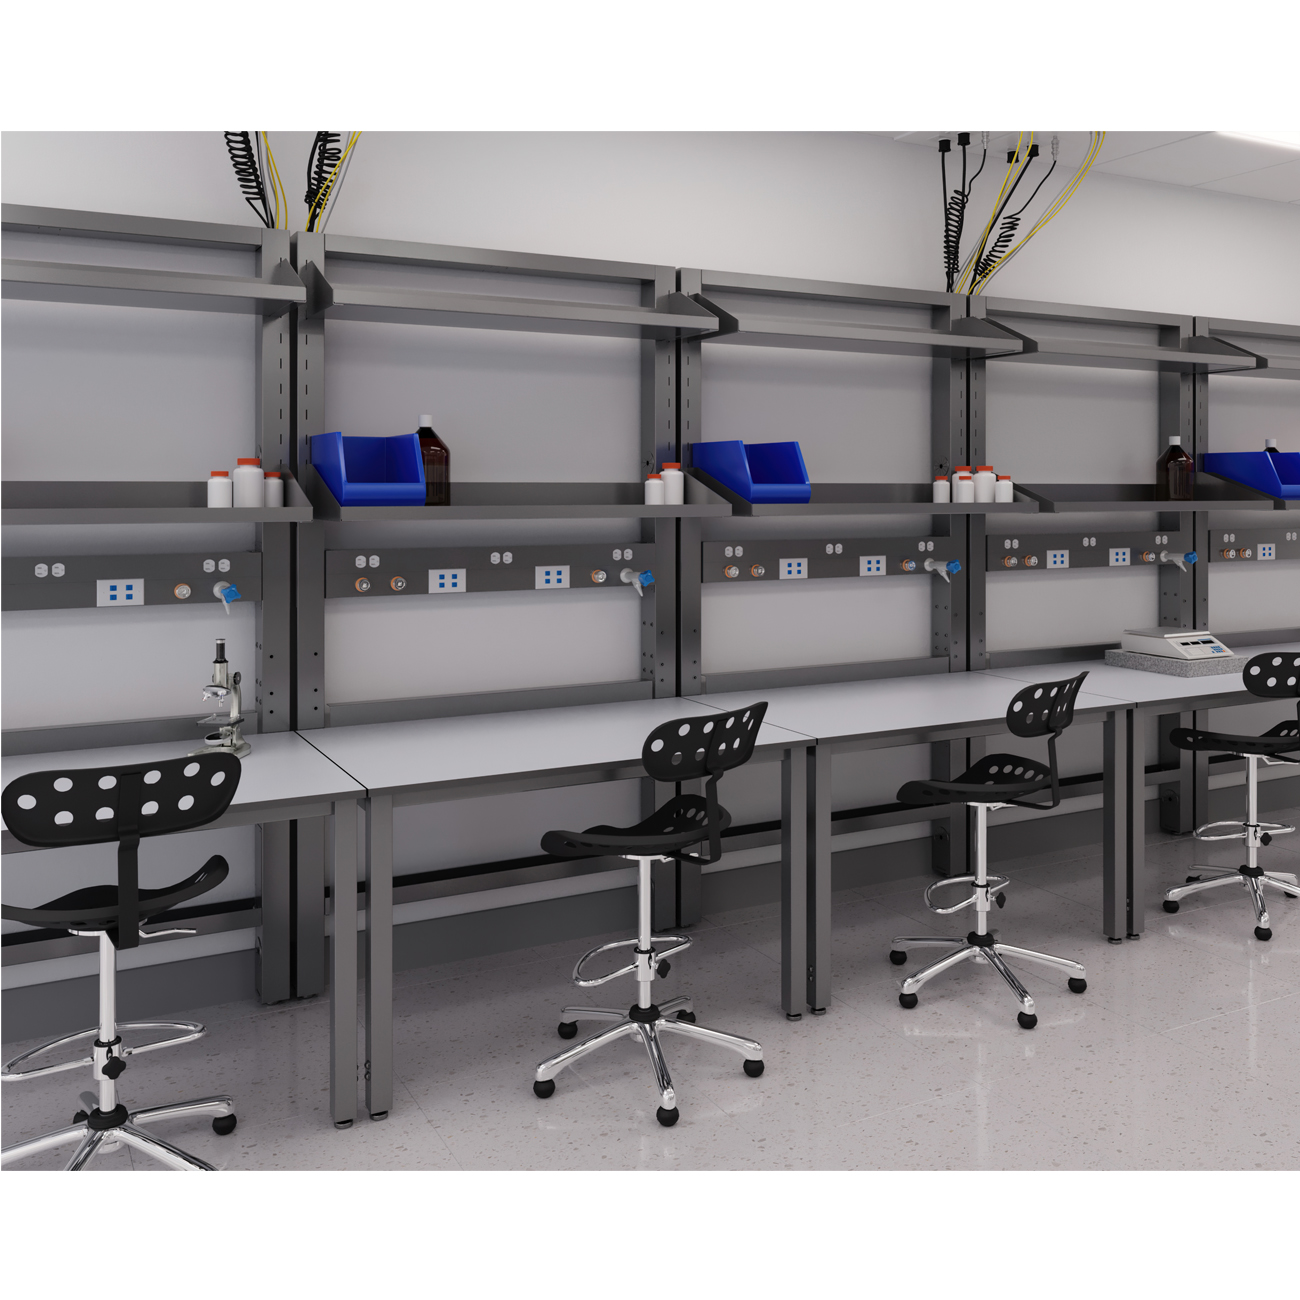 lab bench with wire management trough